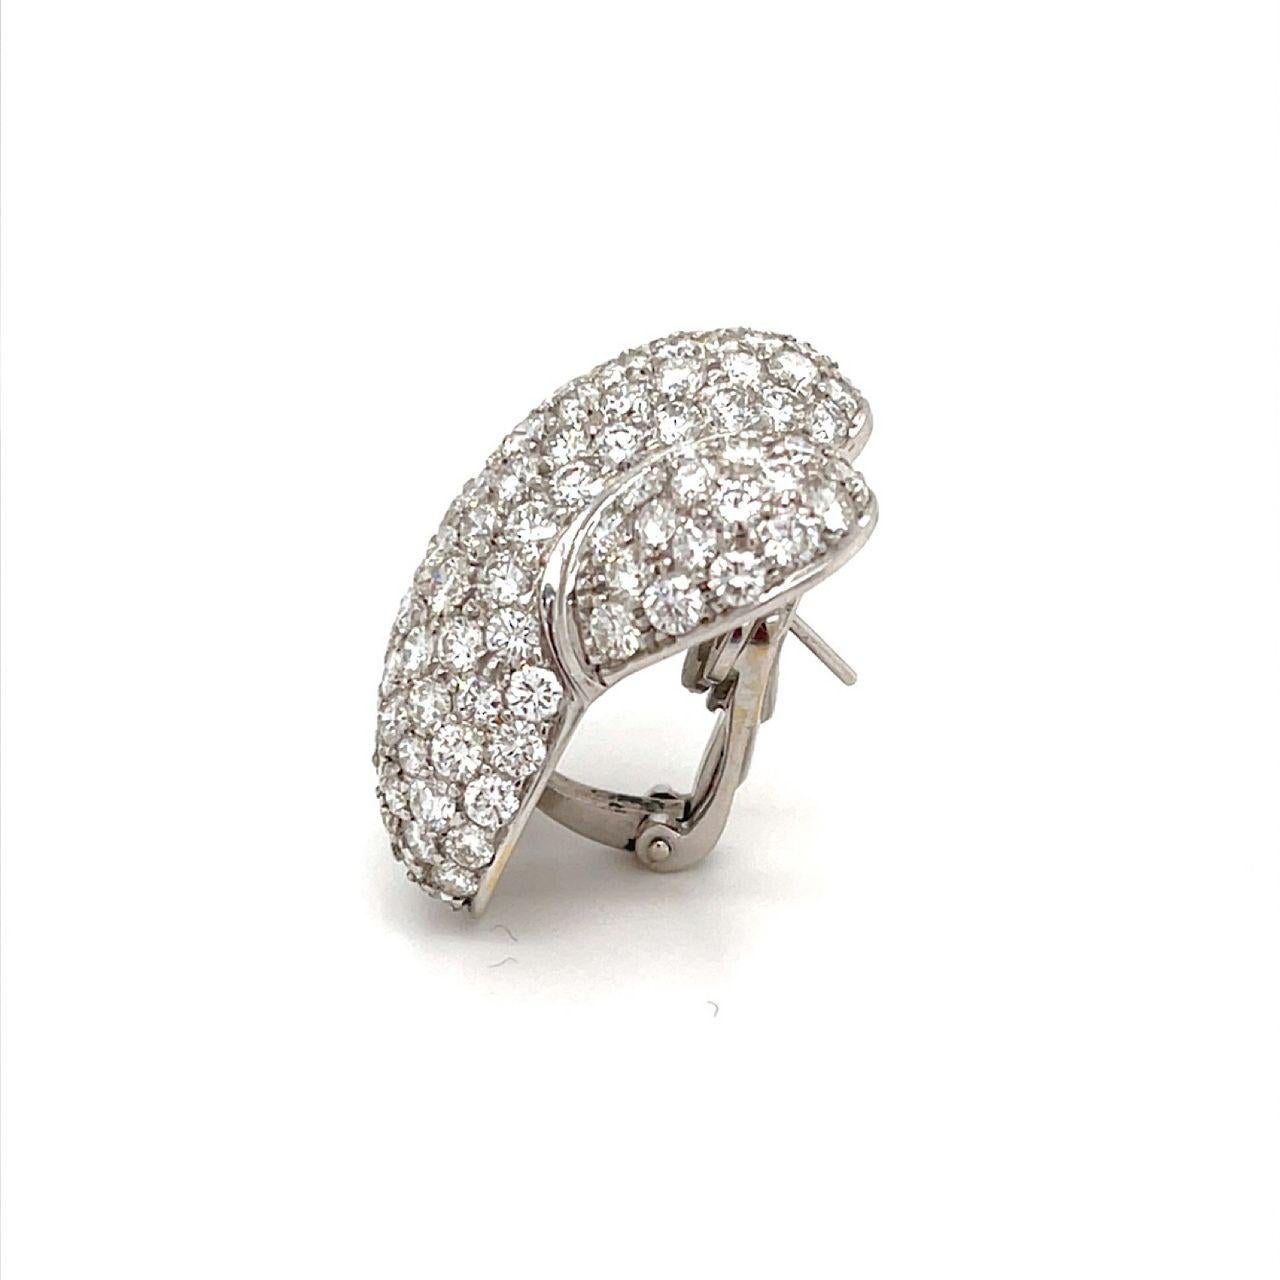 20.00 carats white Diamond Pave' earrings with Omega lever-back, made in 18k white gold